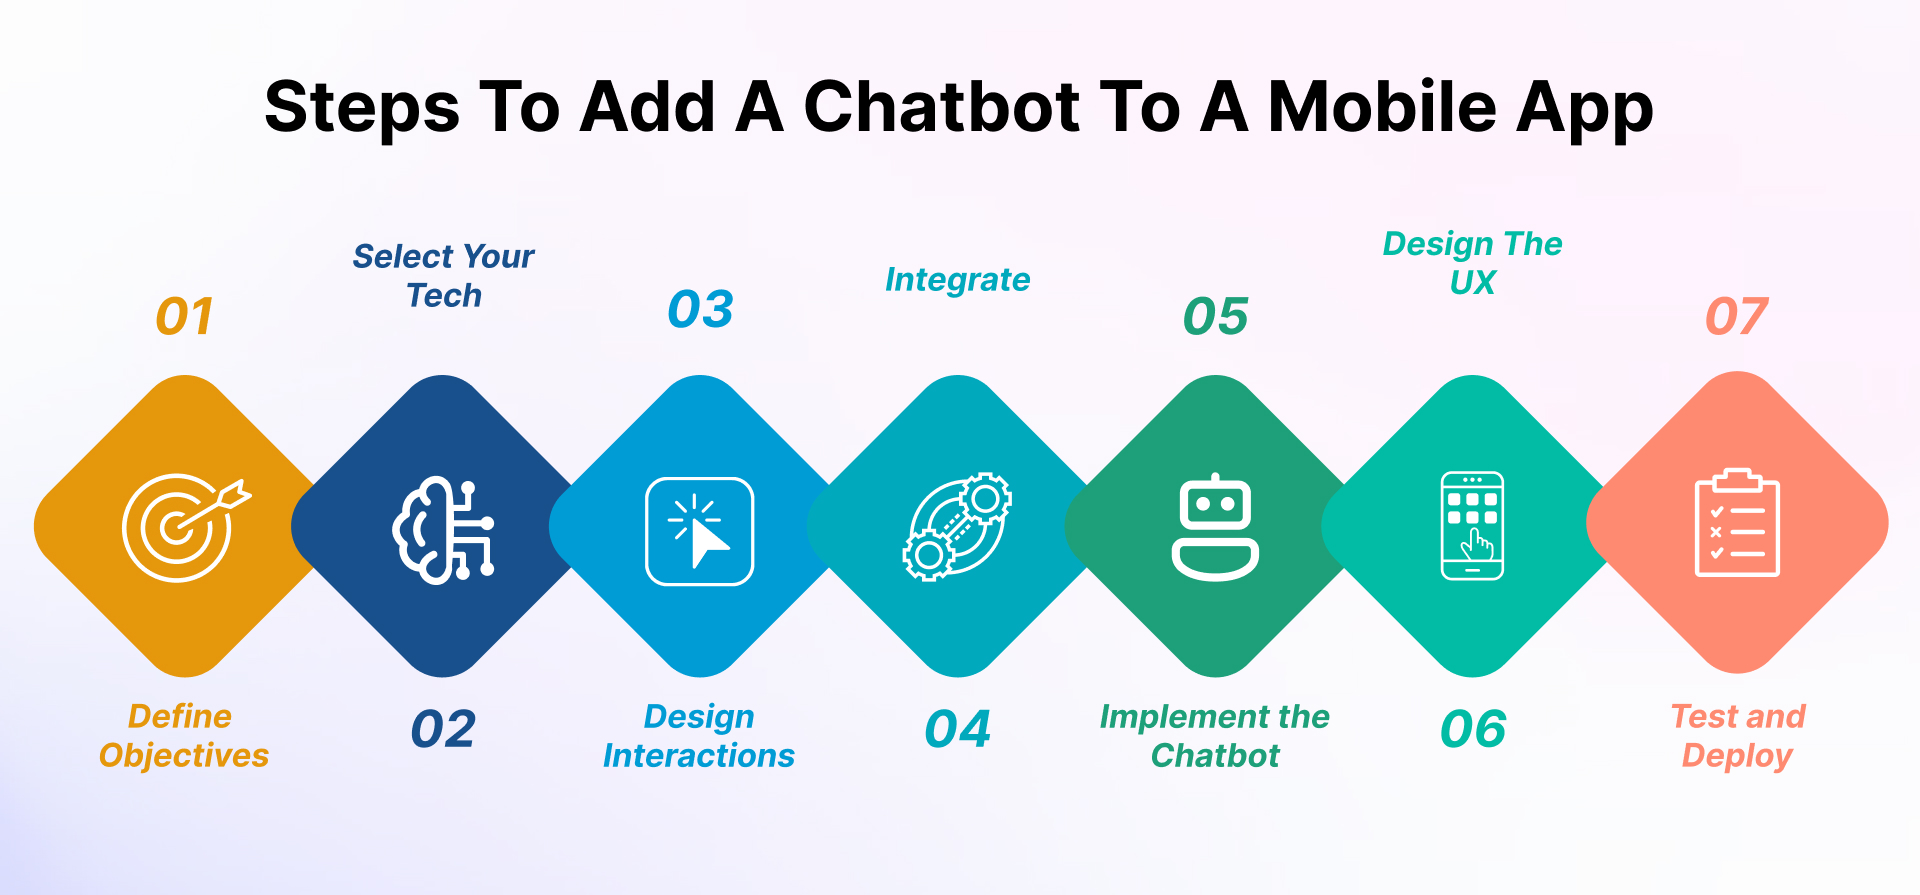 Steps To Add A Chatbot To A Mobile App